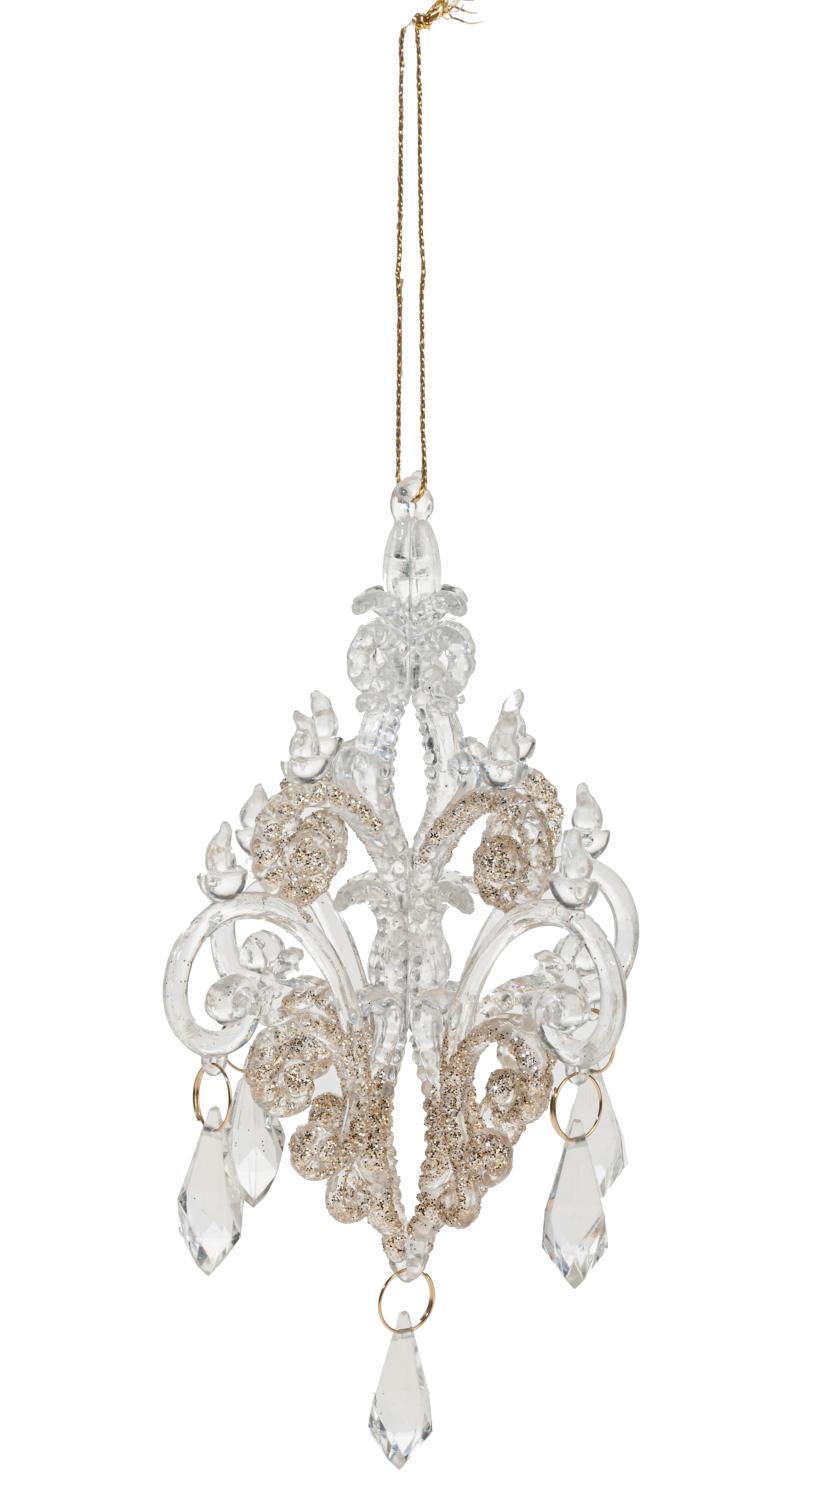 Deco ornament 'Chandelier' made of acrylic material, 14 cm, white-gold